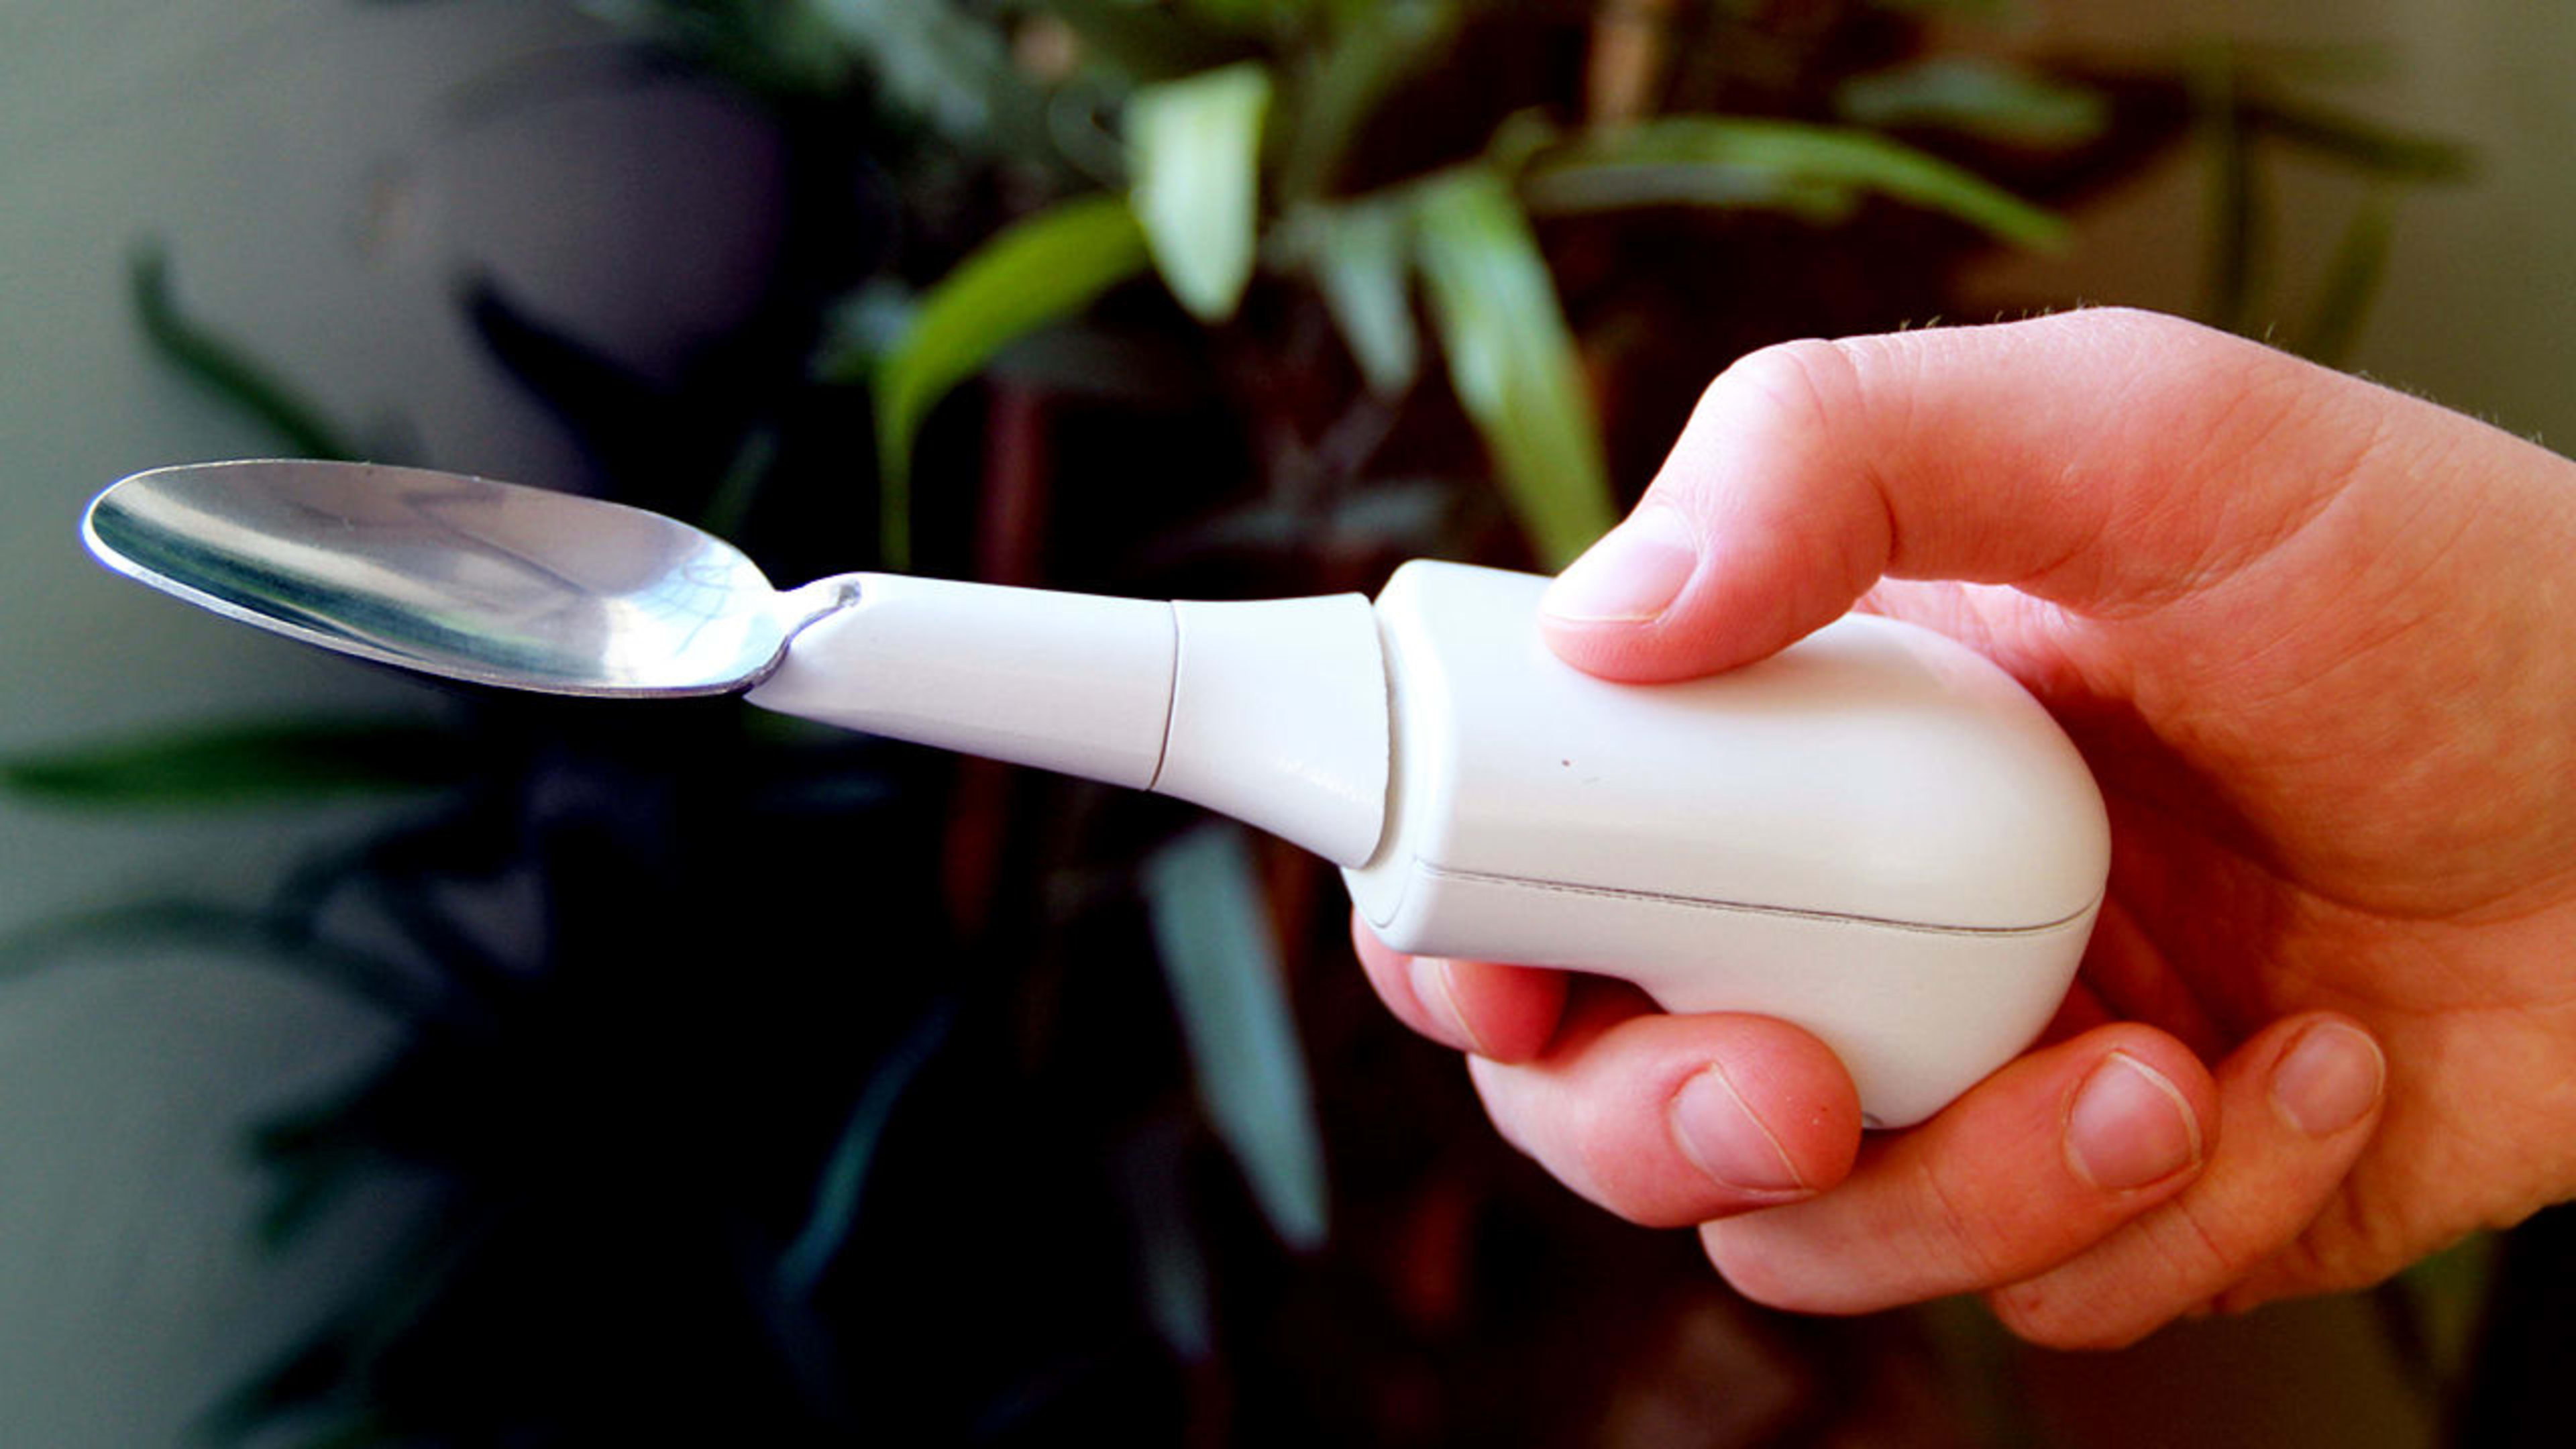 This Google Spoon Makes Eating Easier For People With Disabilities